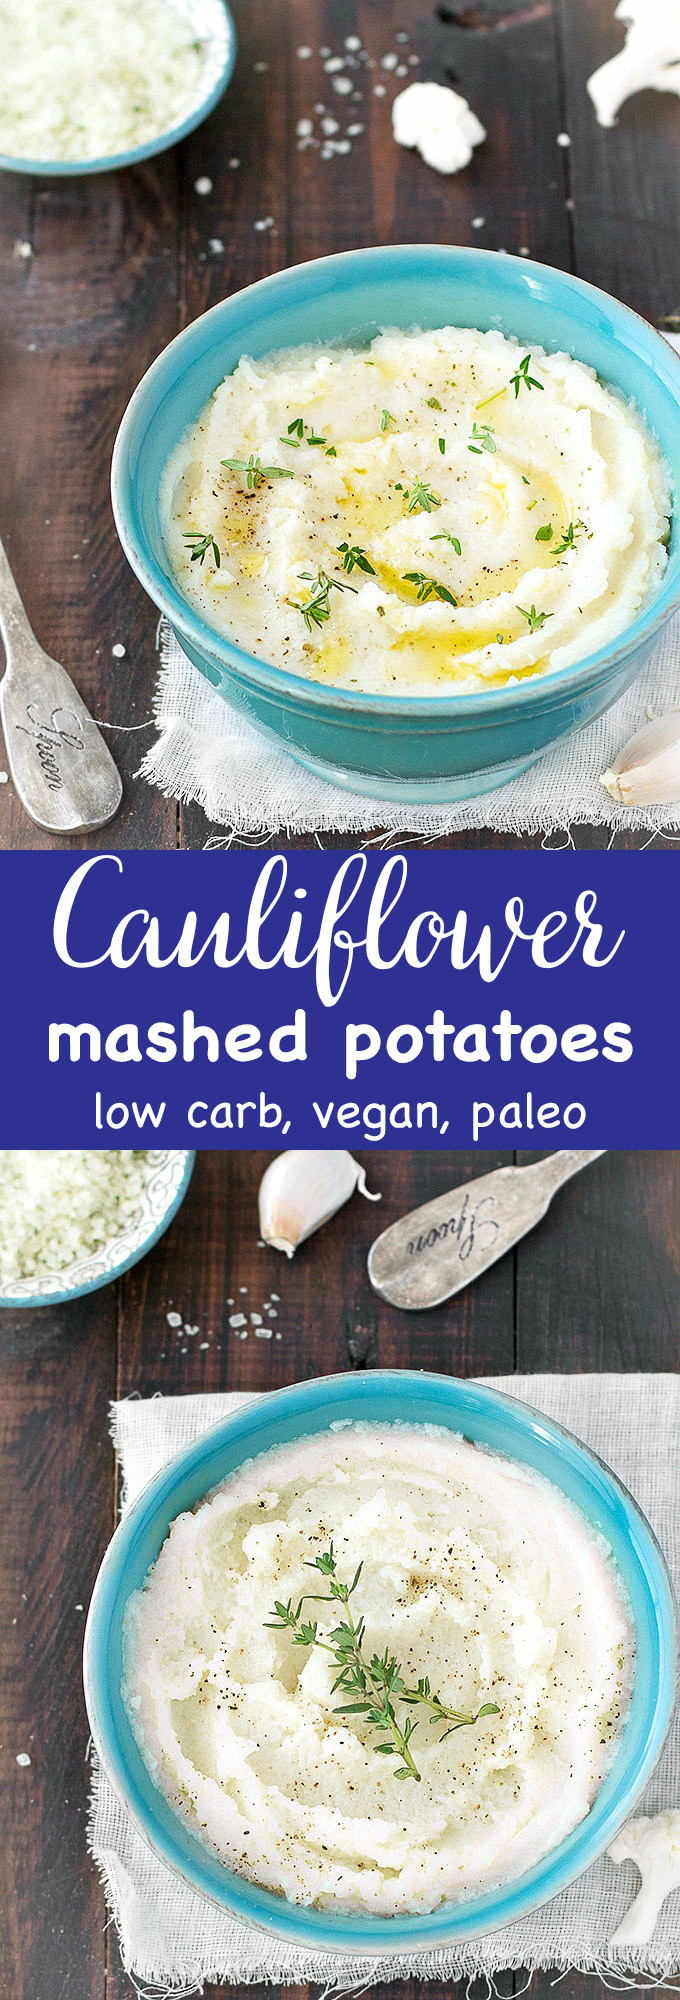 Mashed Cauliflower Recipes Low Carb
 Healthy Cauliflower Mashed Potatoes As Easy As Apple Pie